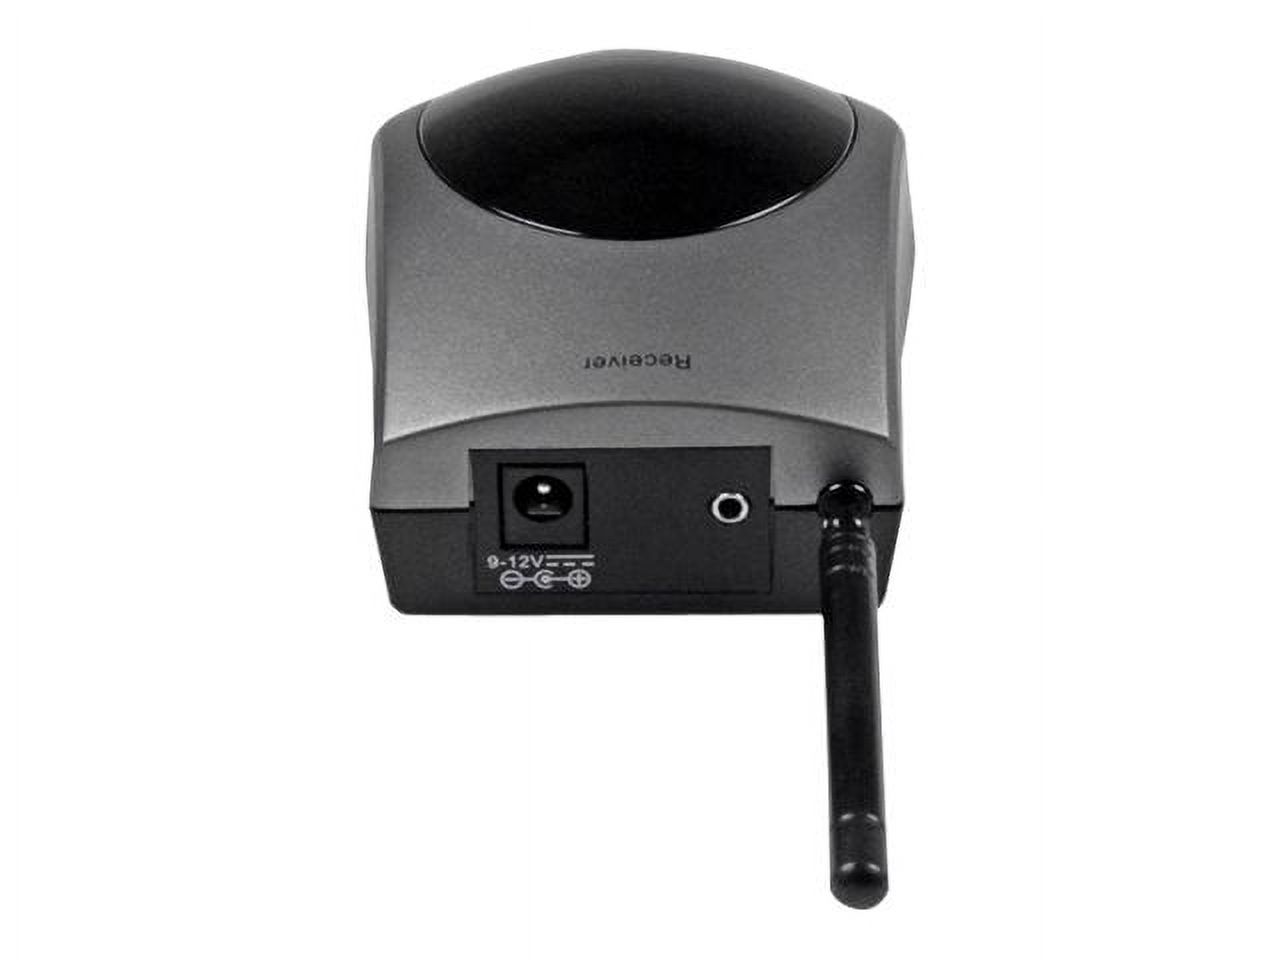 StarTech.com Wireless Infrared IR Remote Control Extender - 330ft (100m) - image 5 of 5